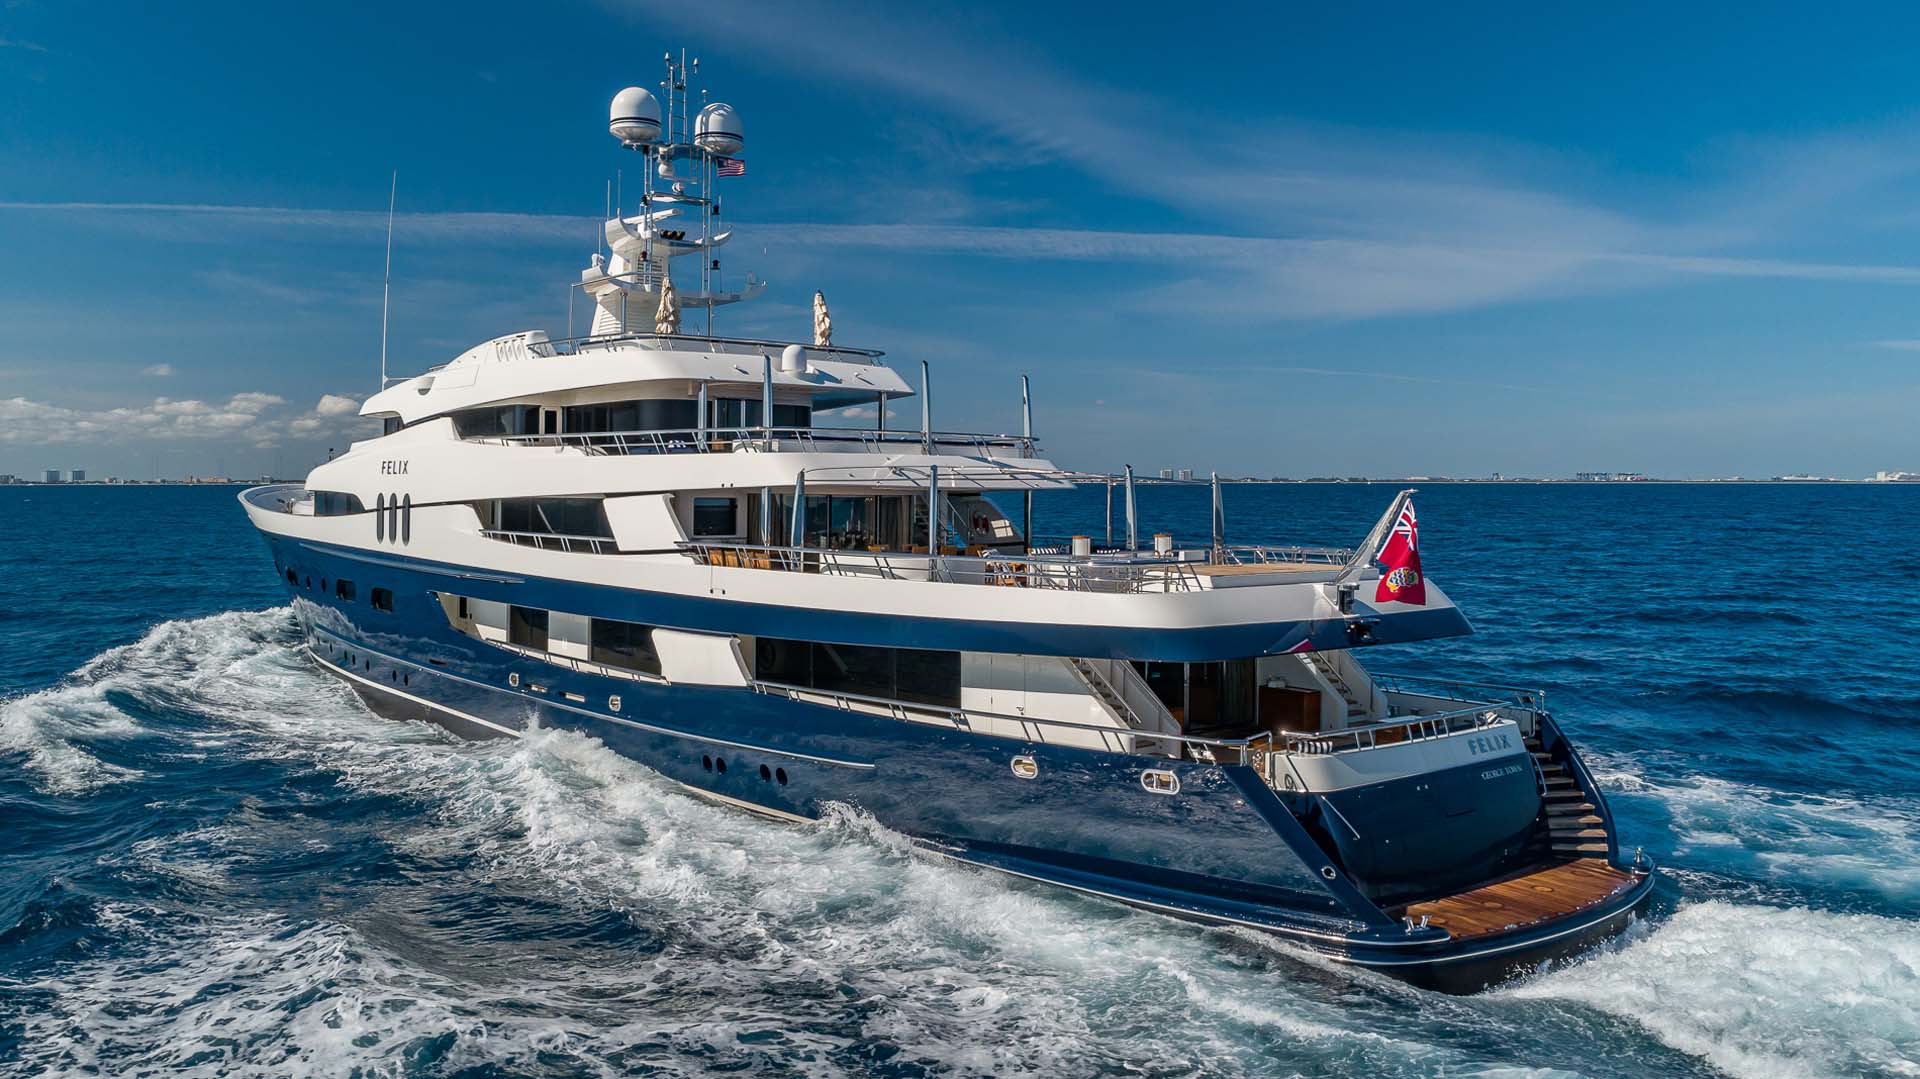 Superyacht Sales And Charter Yacht Brokerage And Management Firm